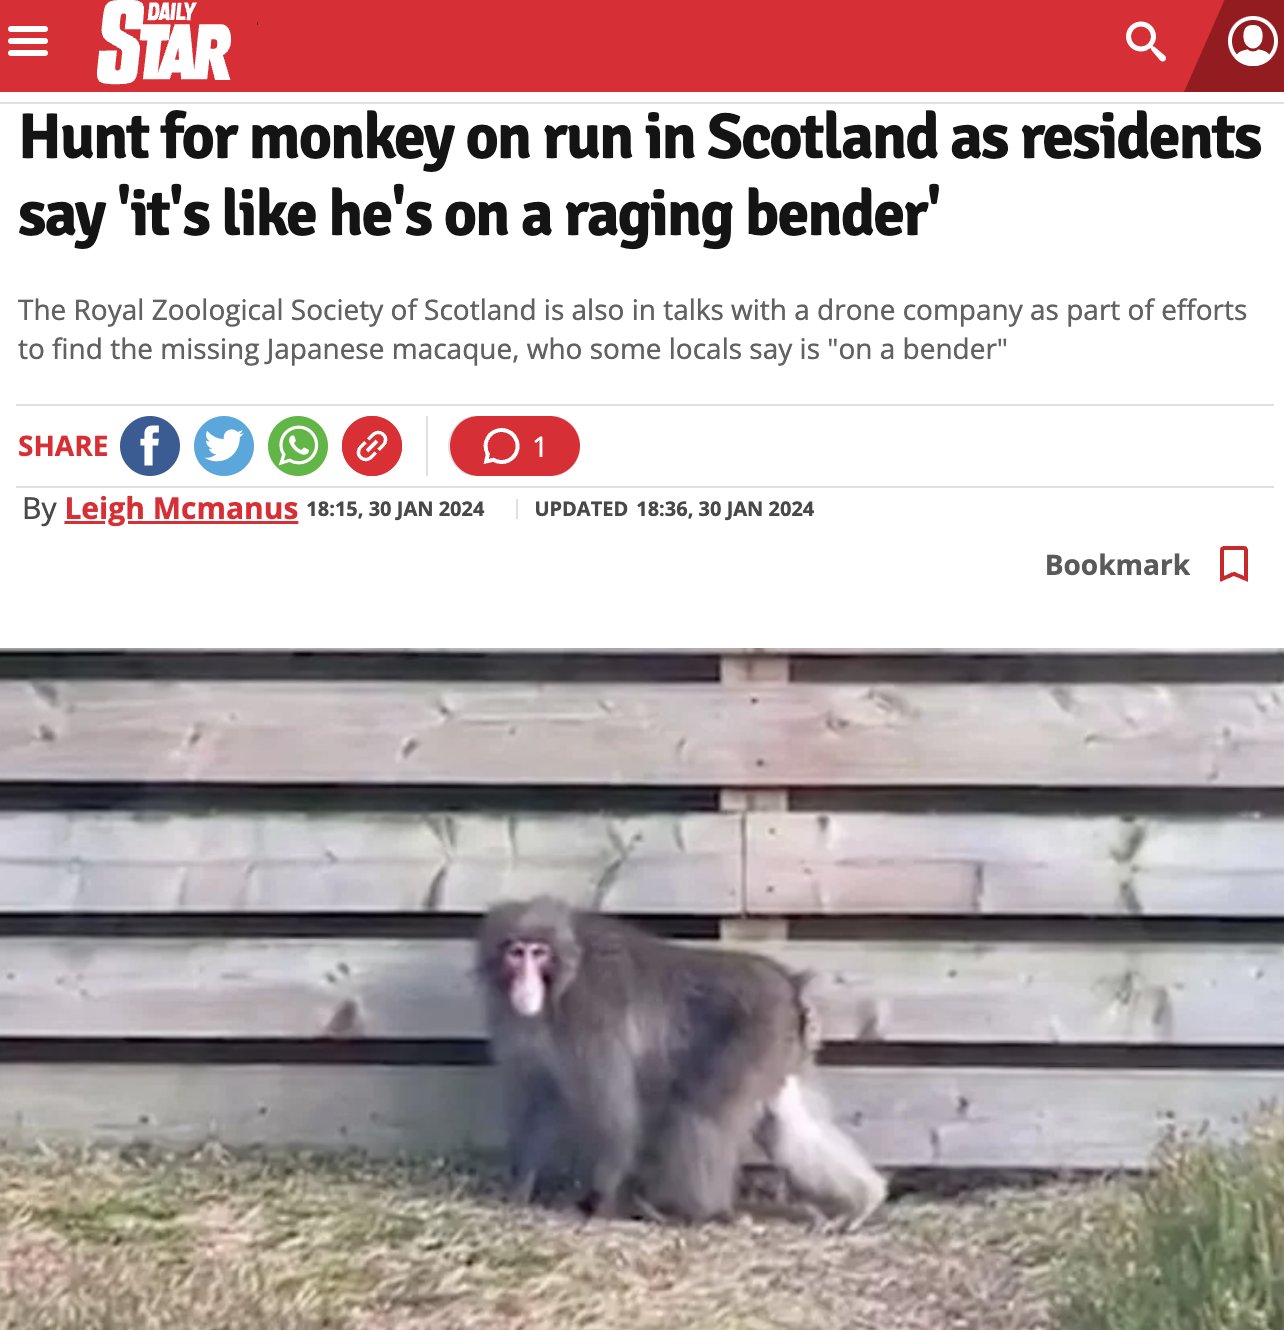 monkey escape scotland - Star Daily a Hunt for monkey on run in Scotland as residents say 'it's he's on a raging bender' The Royal Zoological Society of Scotland is also in talks with a drone company as part of efforts to find the missing Japanese macaque